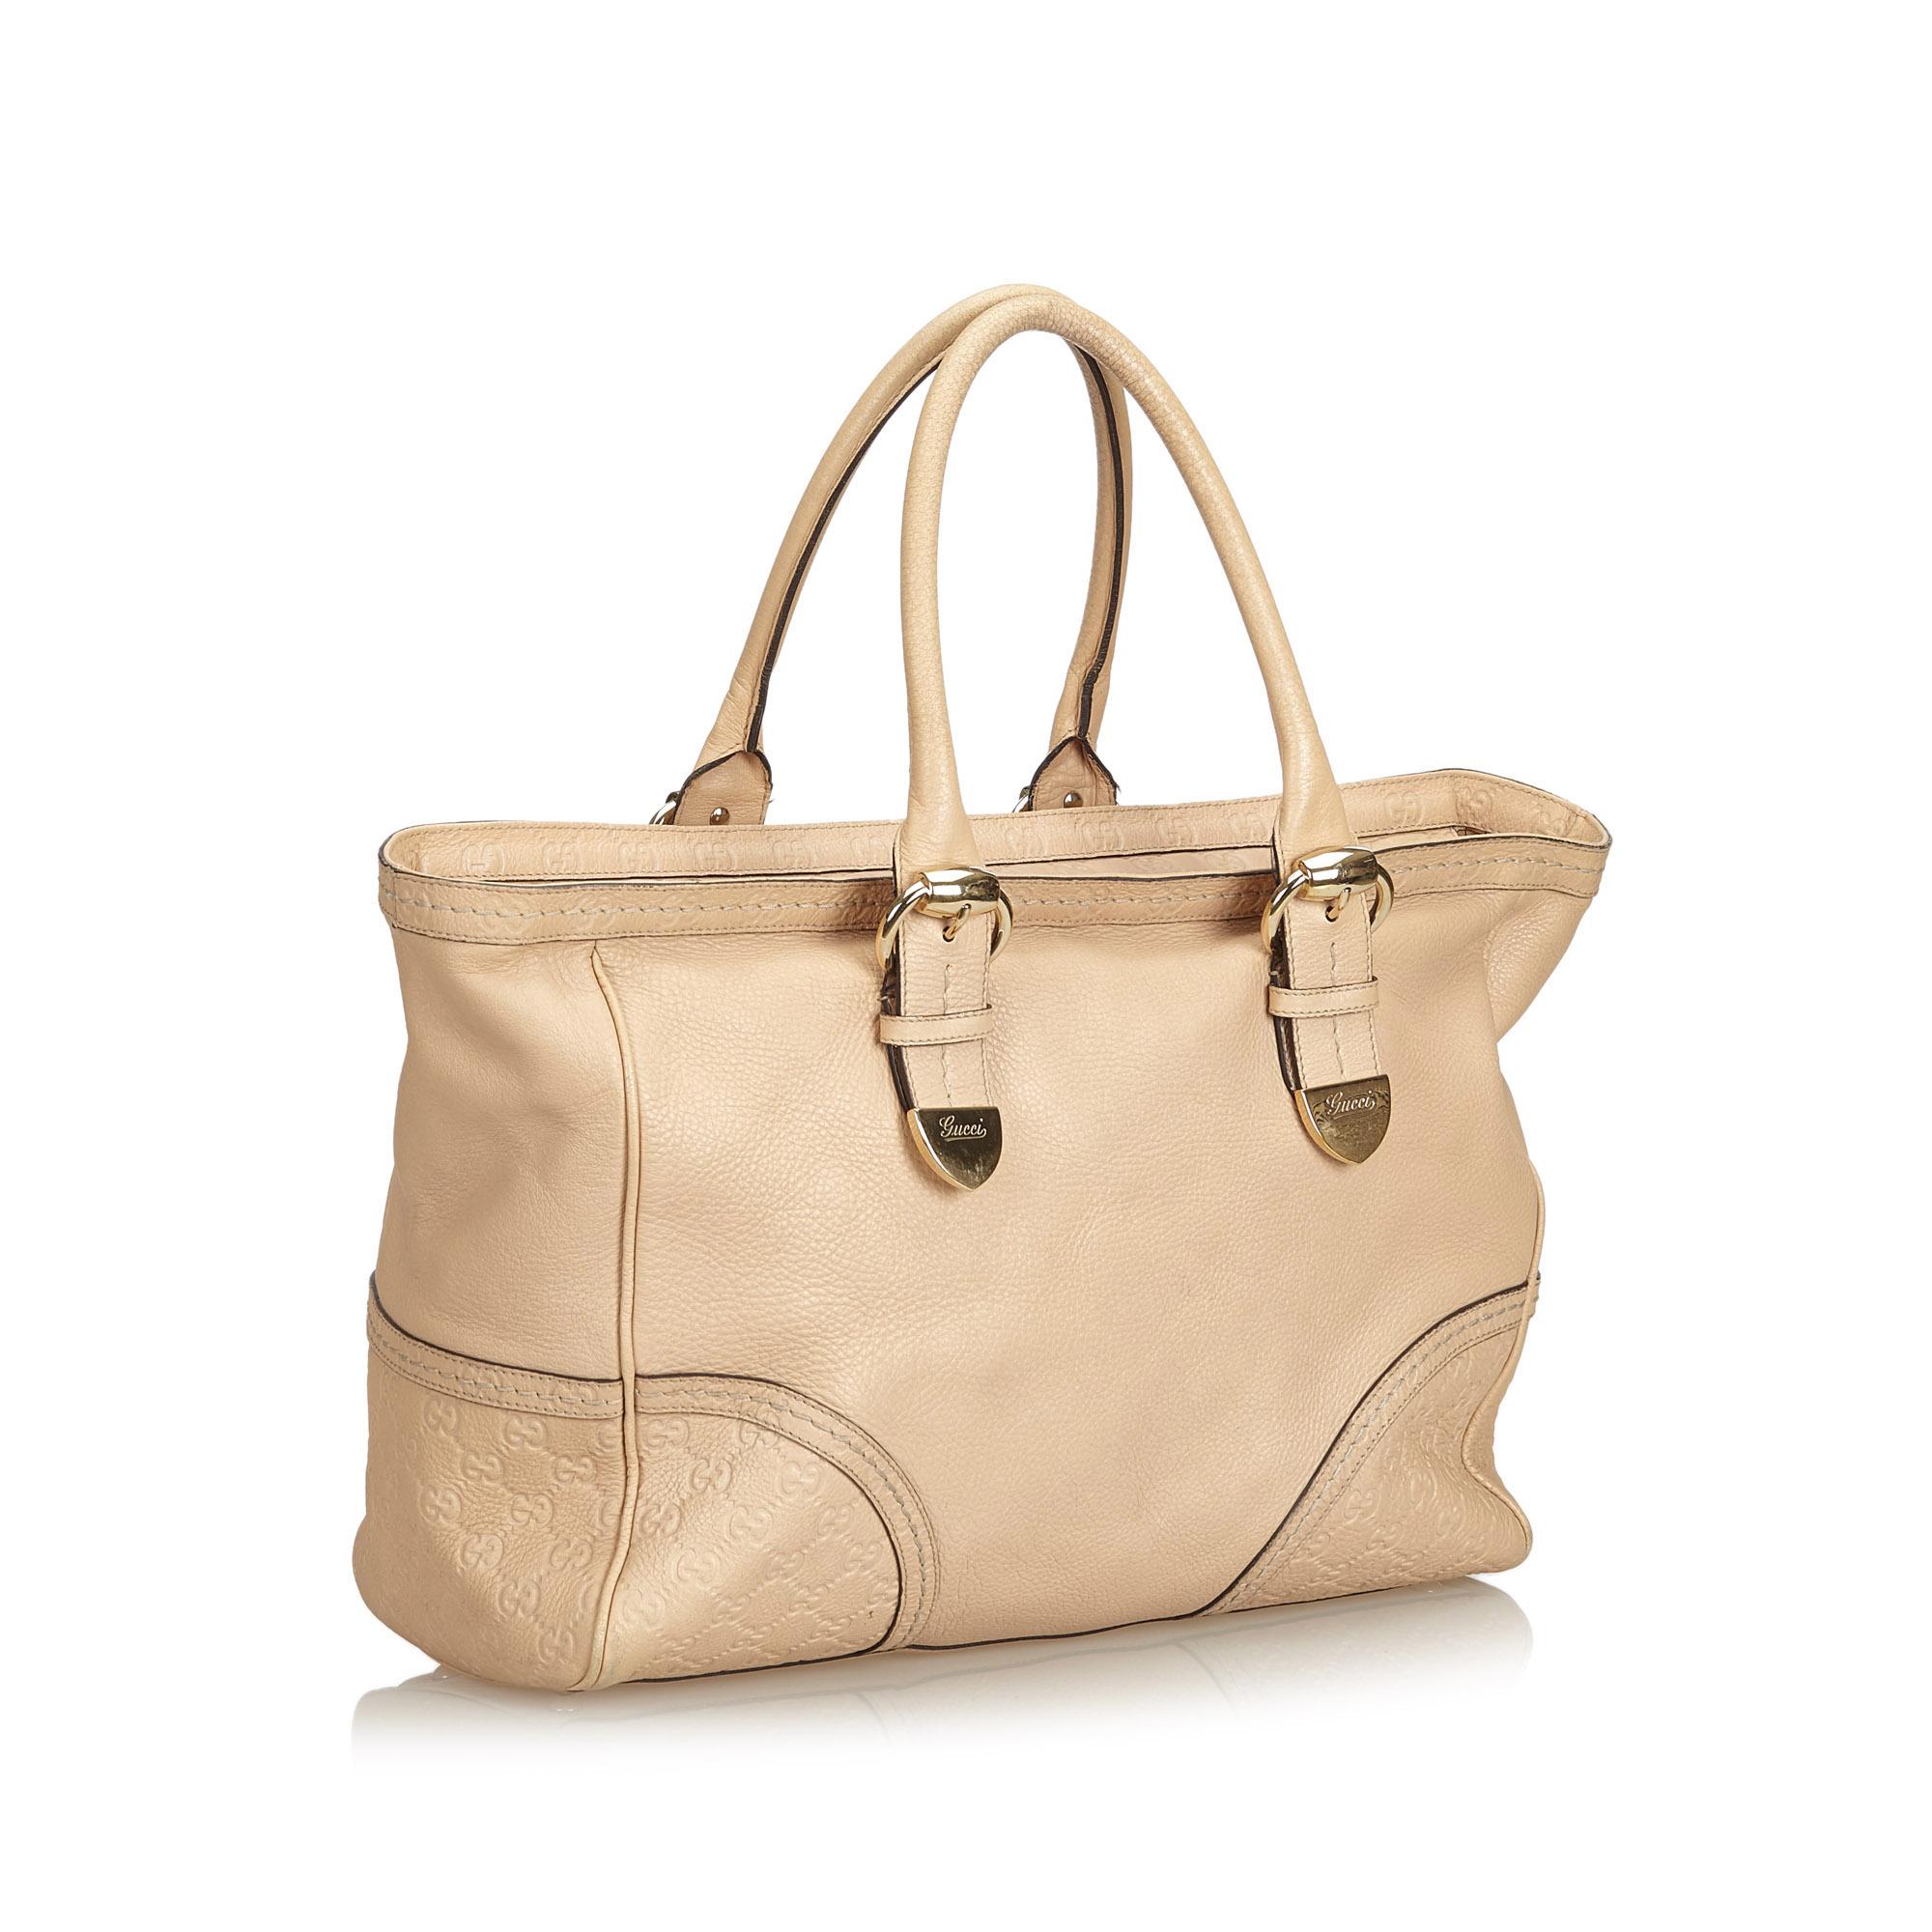 The Signoria tote bag features a leather body, rolled leather handles, top zip closure, and interior zip and slip pockets. It carries as B condition rating.

Inclusions: 
This item does not come with inclusions.

Dimensions:
Length: 28.00 cm
Width: